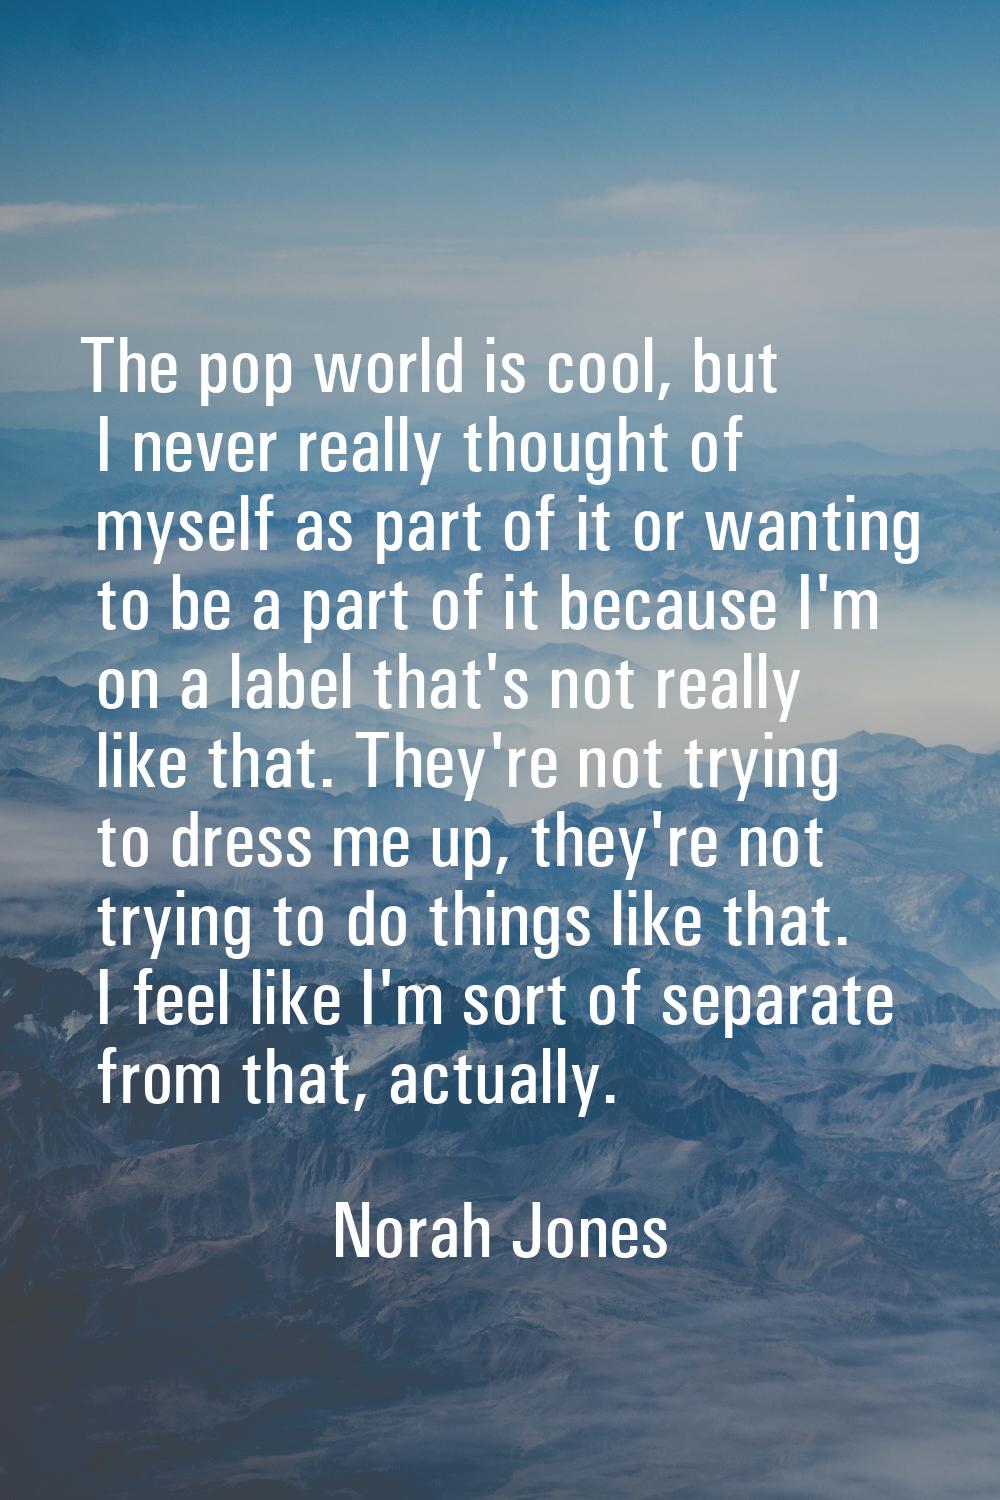 The pop world is cool, but I never really thought of myself as part of it or wanting to be a part o